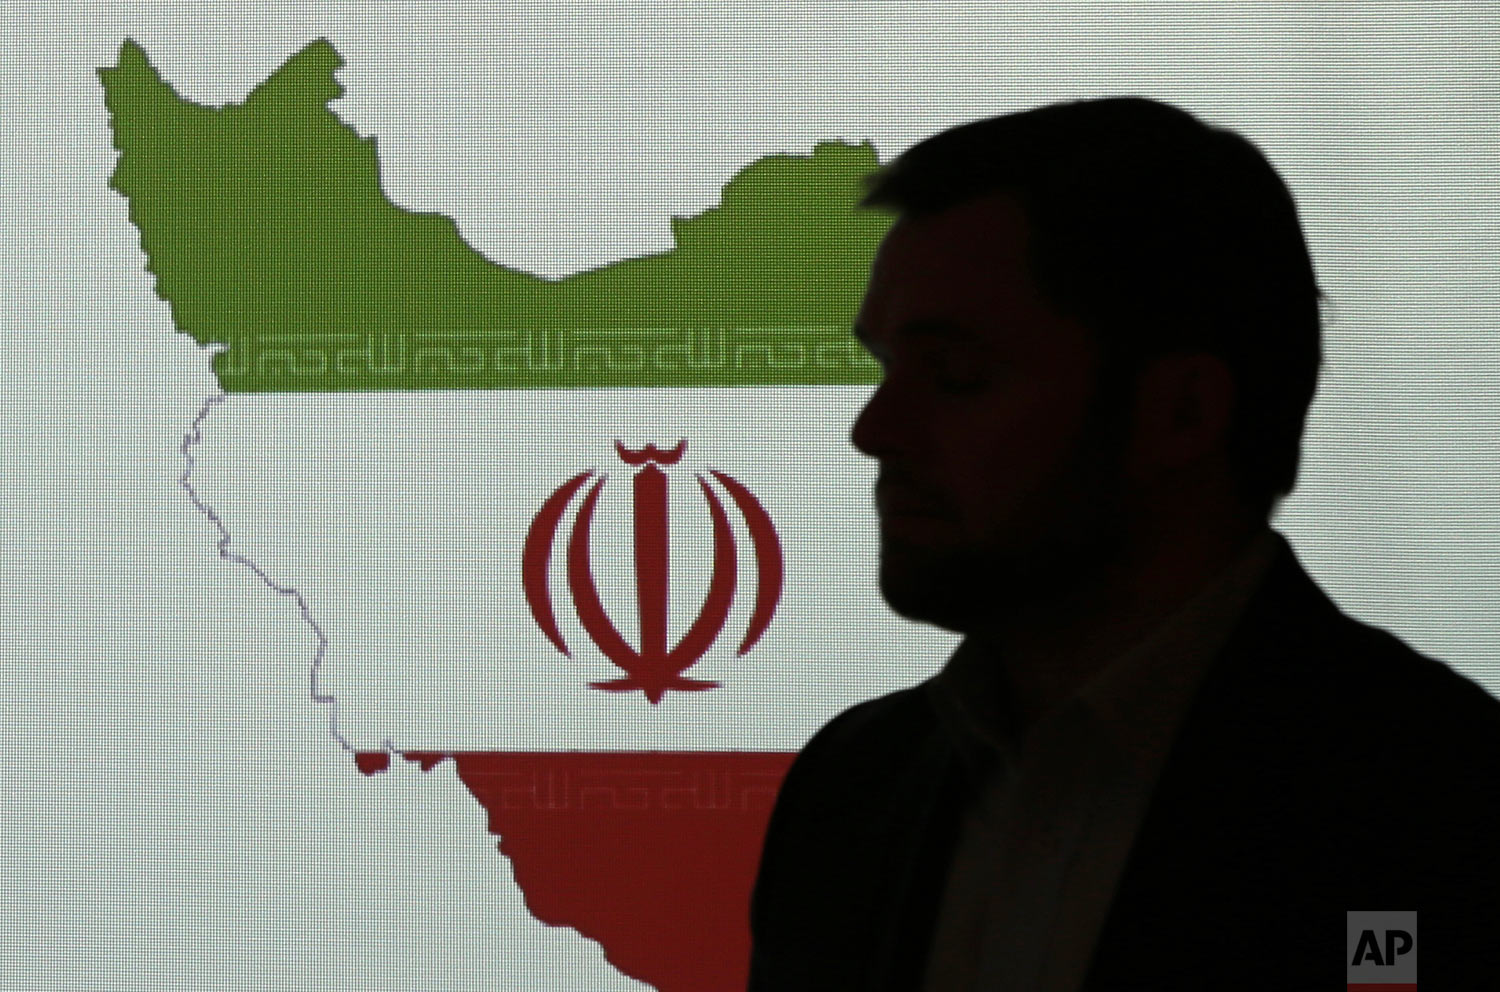  Stuart Davis, a director at one of FireEye's subsidiaries, stands in front of a map of Iran as he speaks to journalists about the techniques of Iranian hacking, Wednesday, Sept. 20, 2017, in Dubai, United Arab Emirates. (AP Photo/Kamran Jebreili) 